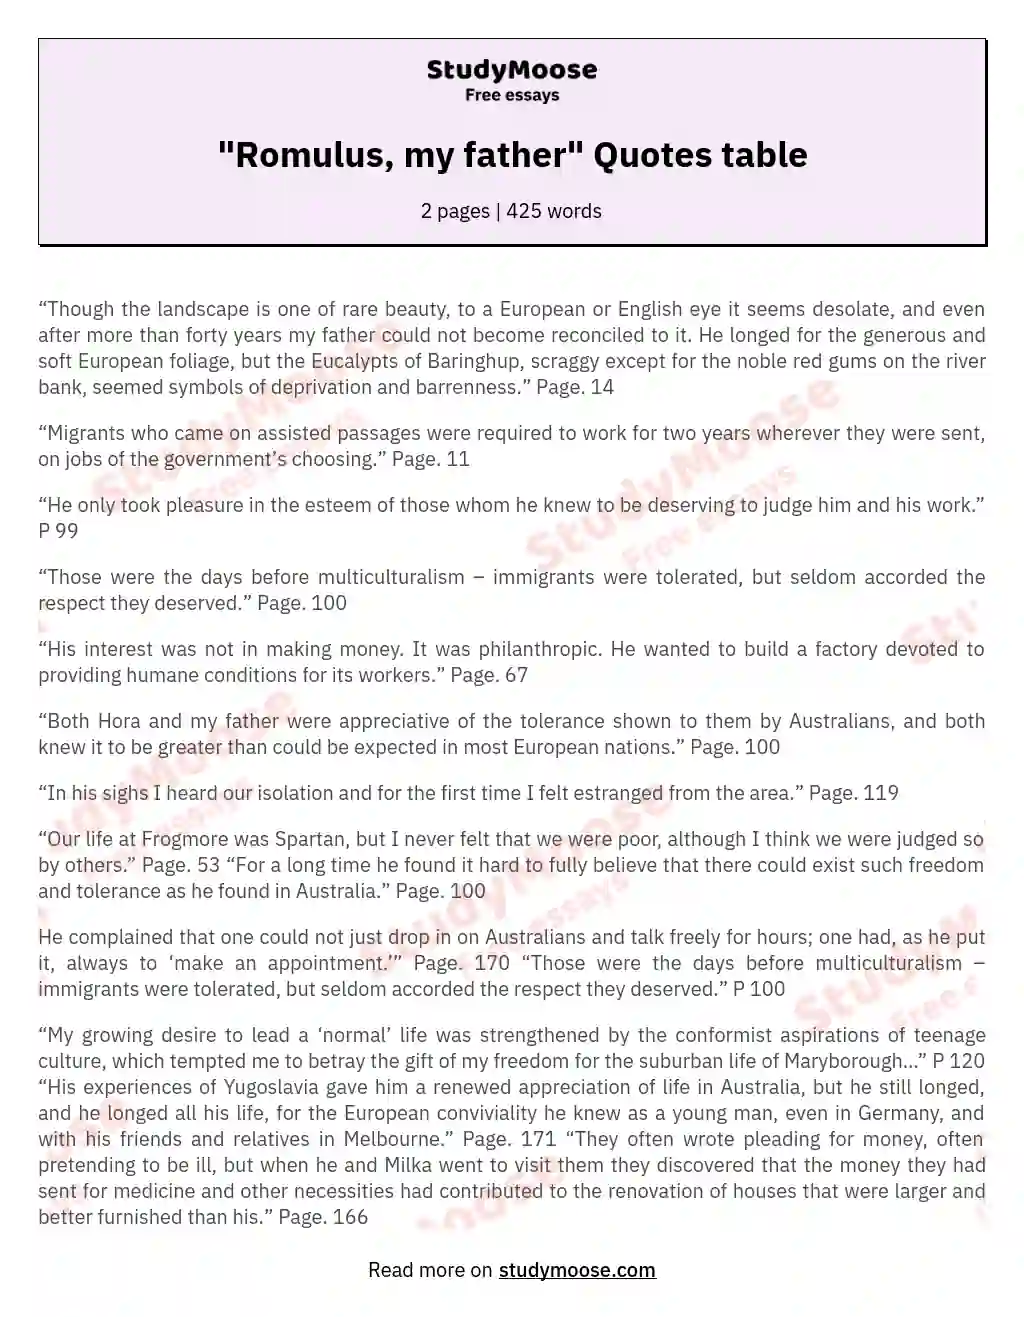 "Romulus, my father" Quotes table essay